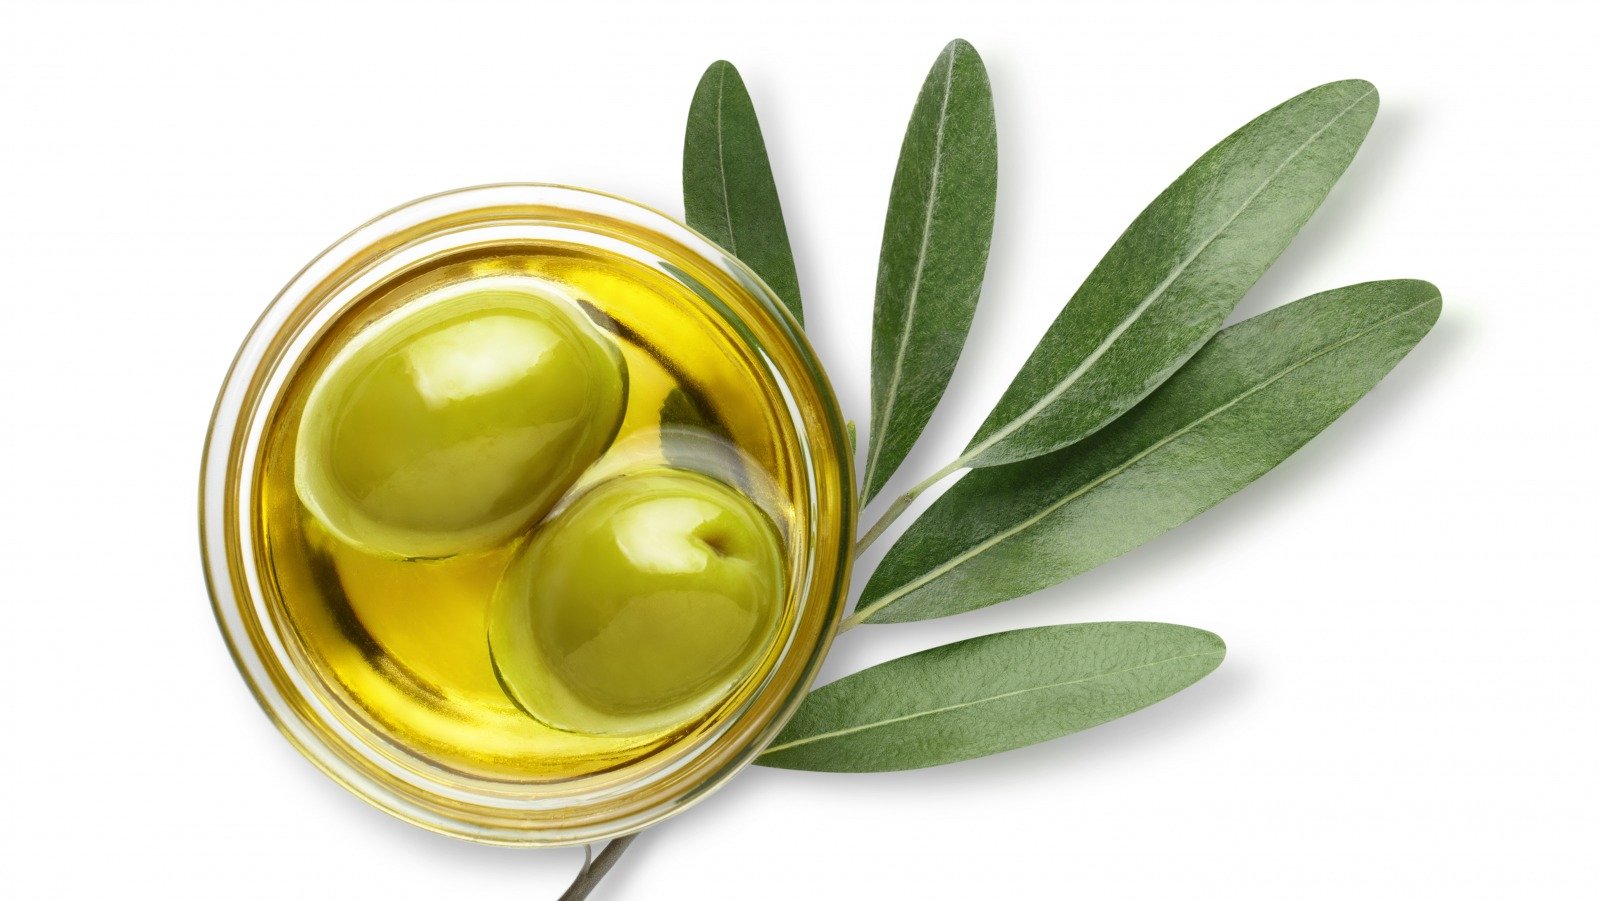 Olive Oil Vs Avocado Oil: Which One Is Better For You?